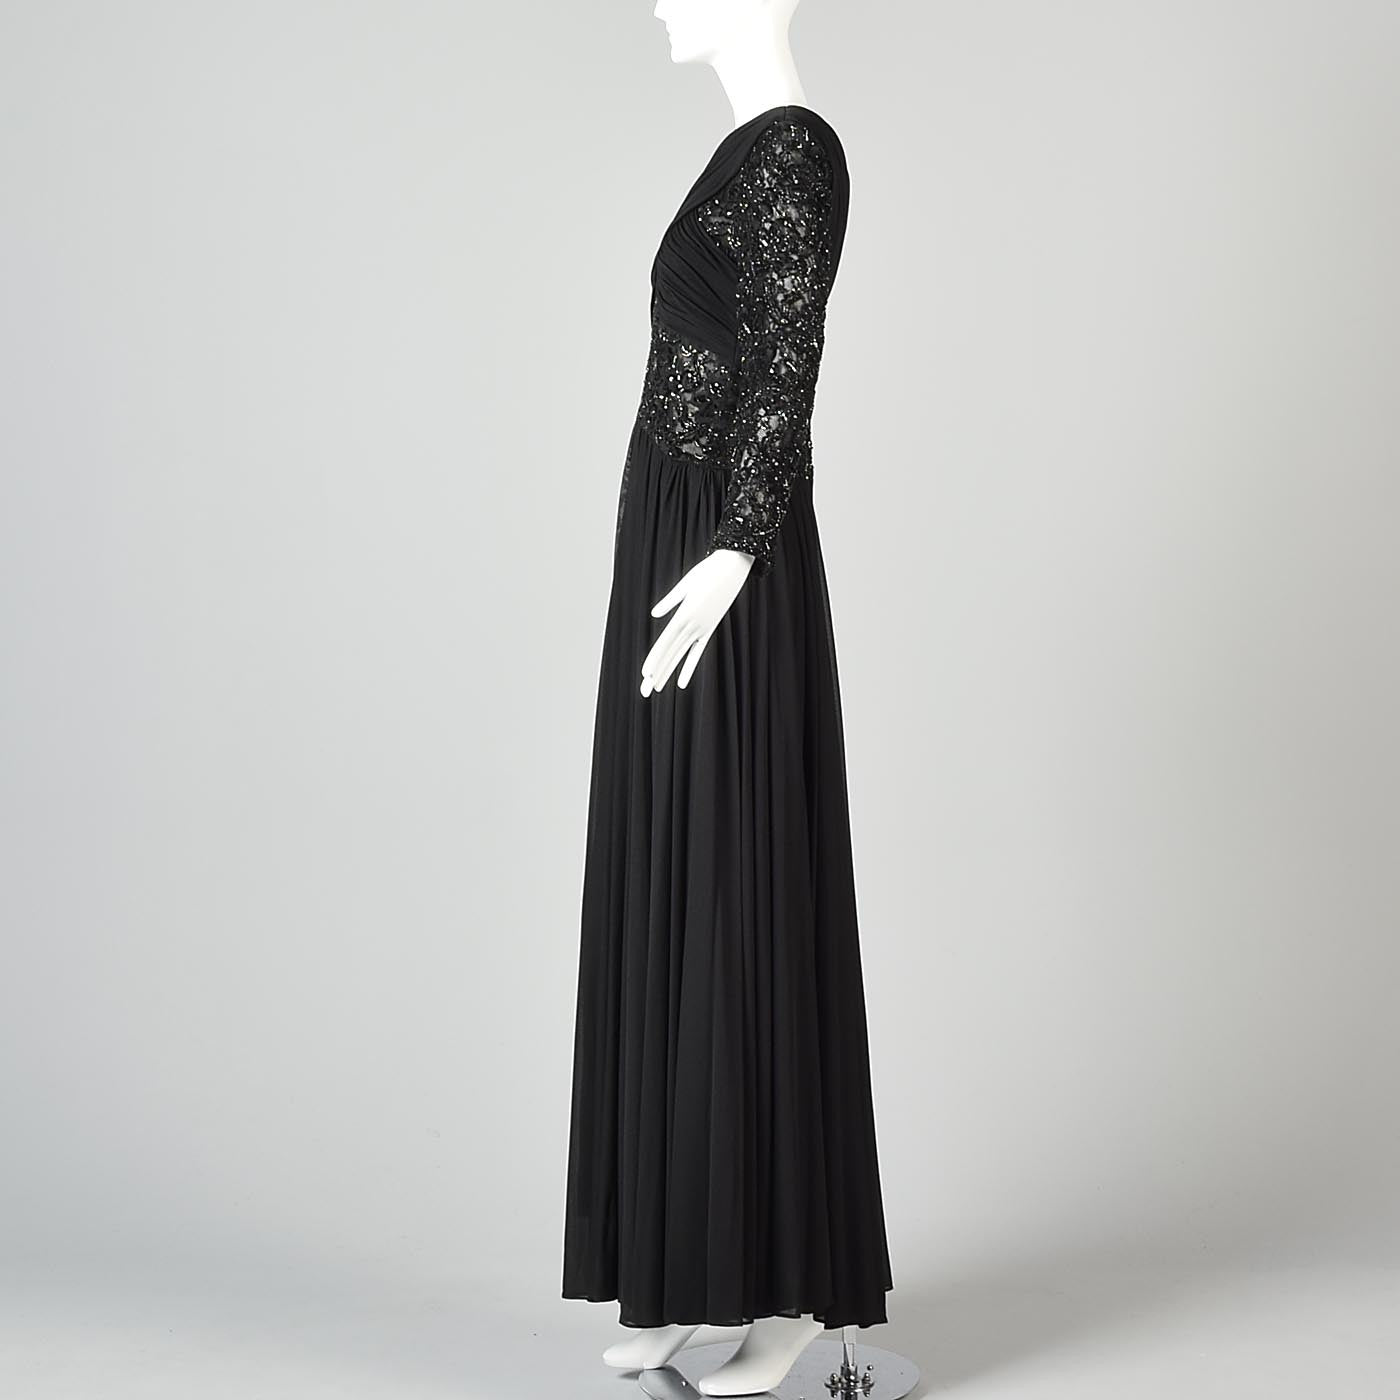 1970s Victoria Royal Black Dress with Sheer Beaded Panels